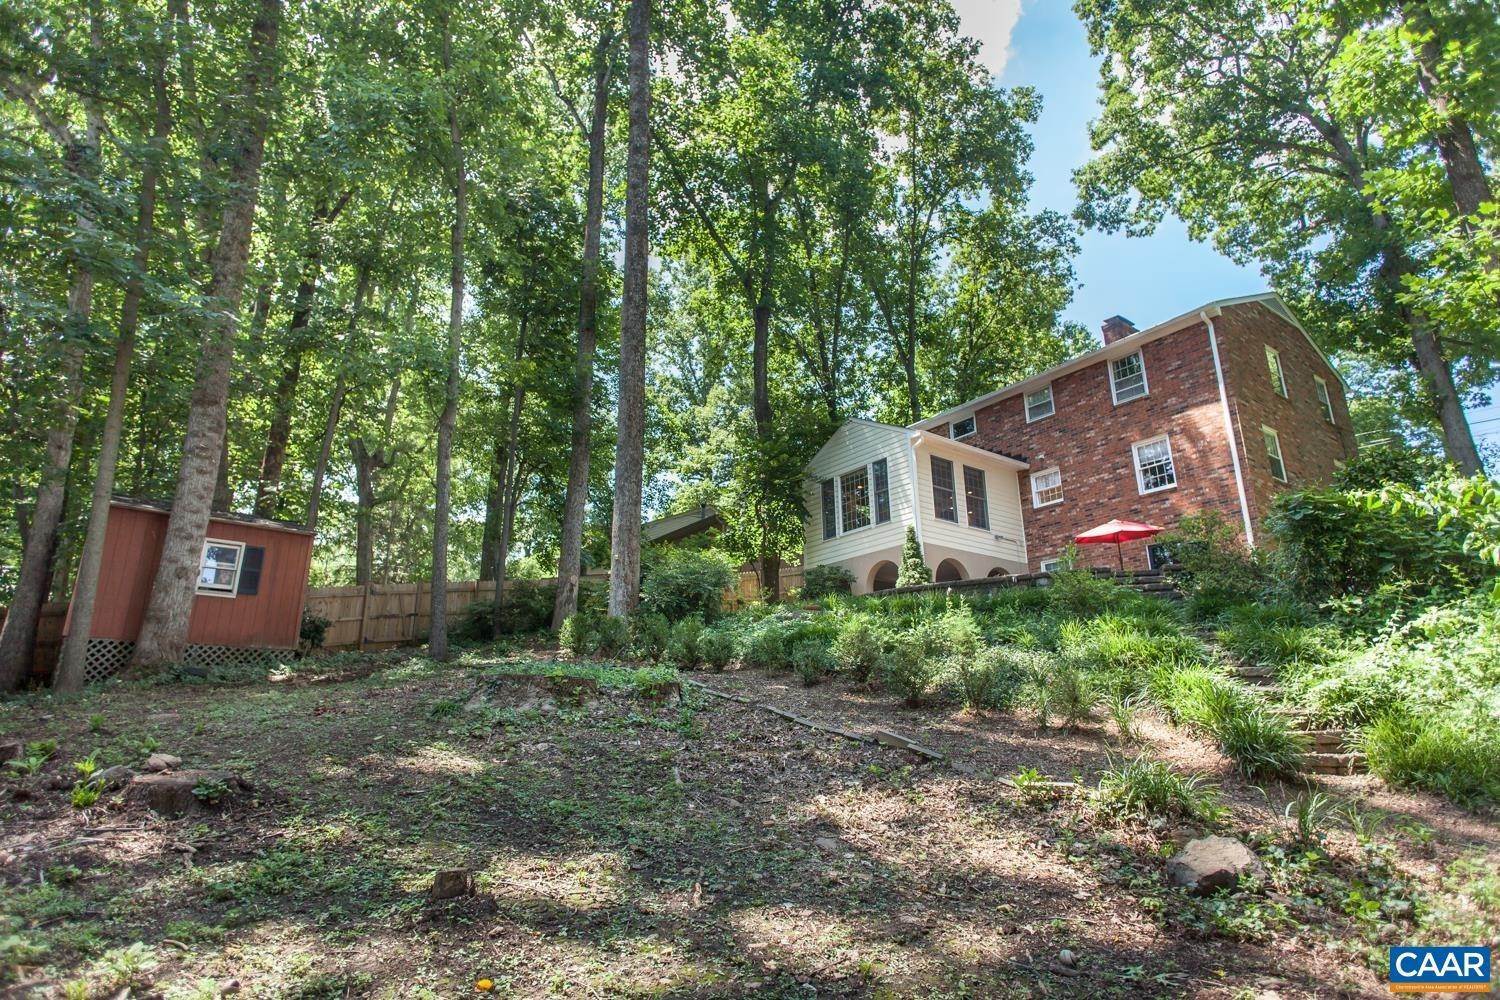 45. Single Family Homes for Sale at 106 KERRY Lane Charlottesville, Virginia 22901 United States